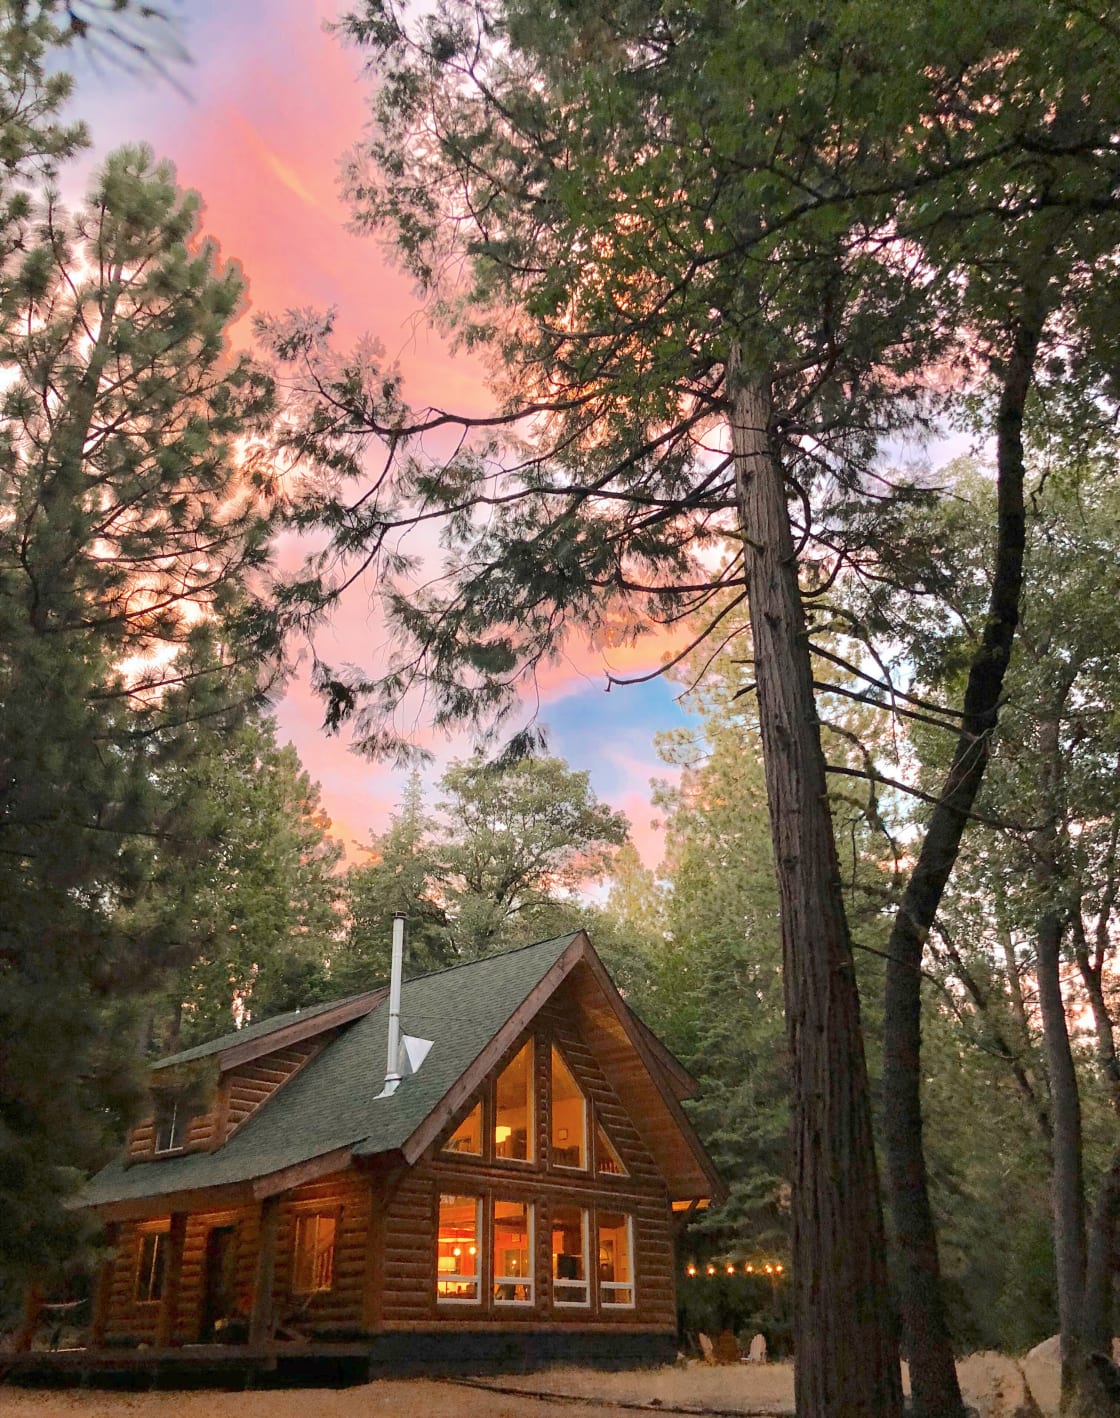 The cabin at sunset